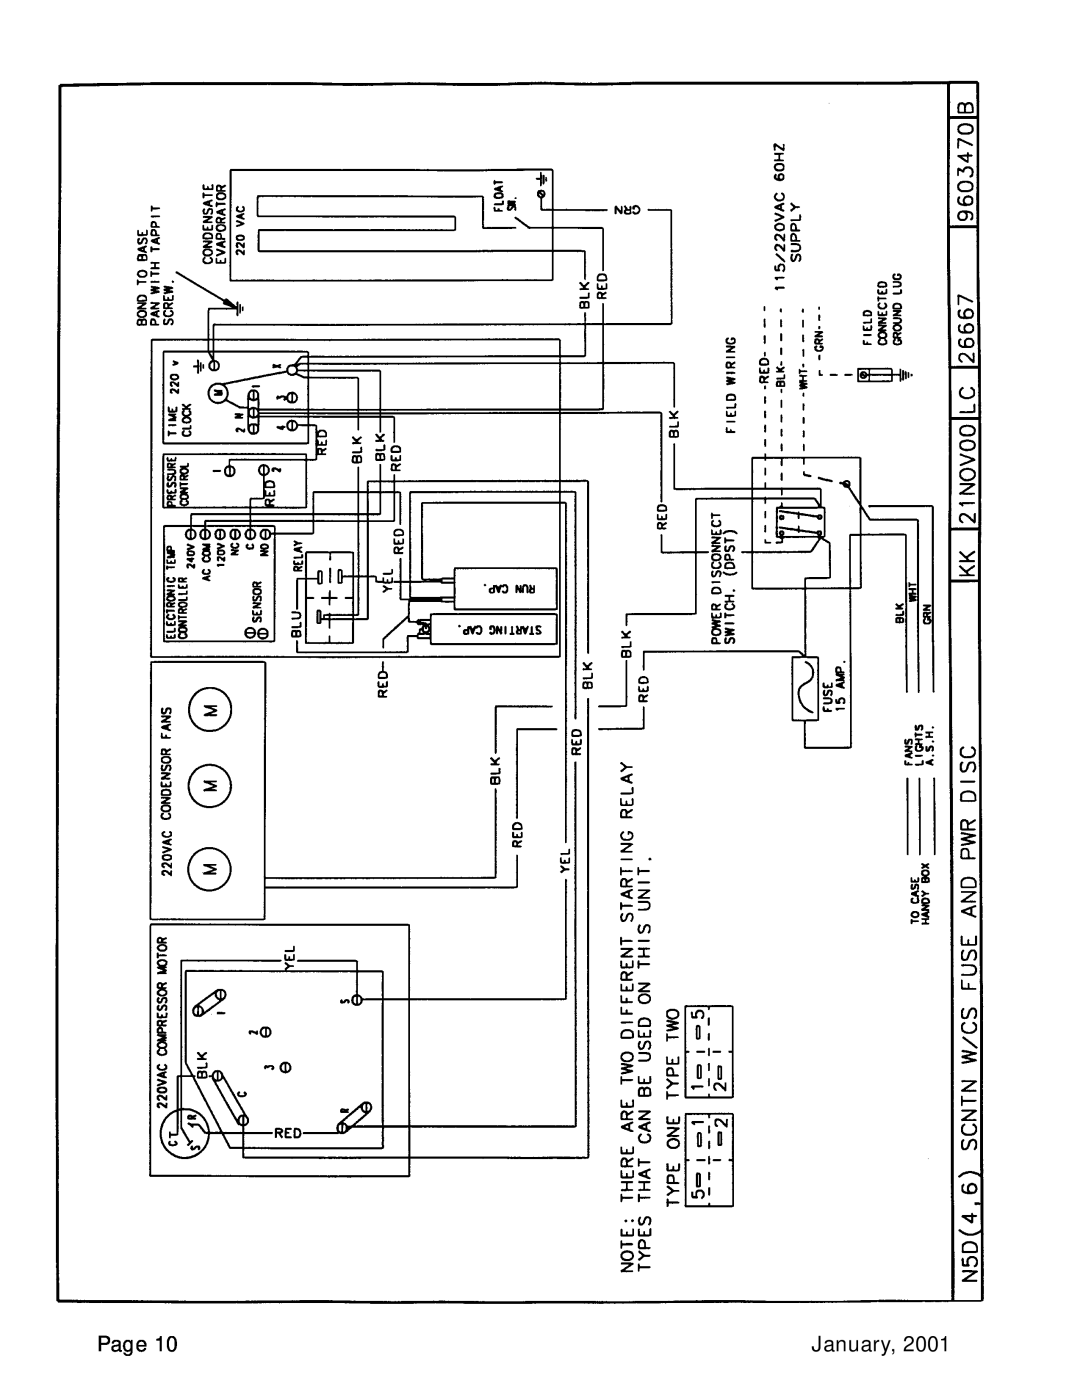 Tyler Refrigeration N5DH, N5DL, N5DSC service manual Page, January 